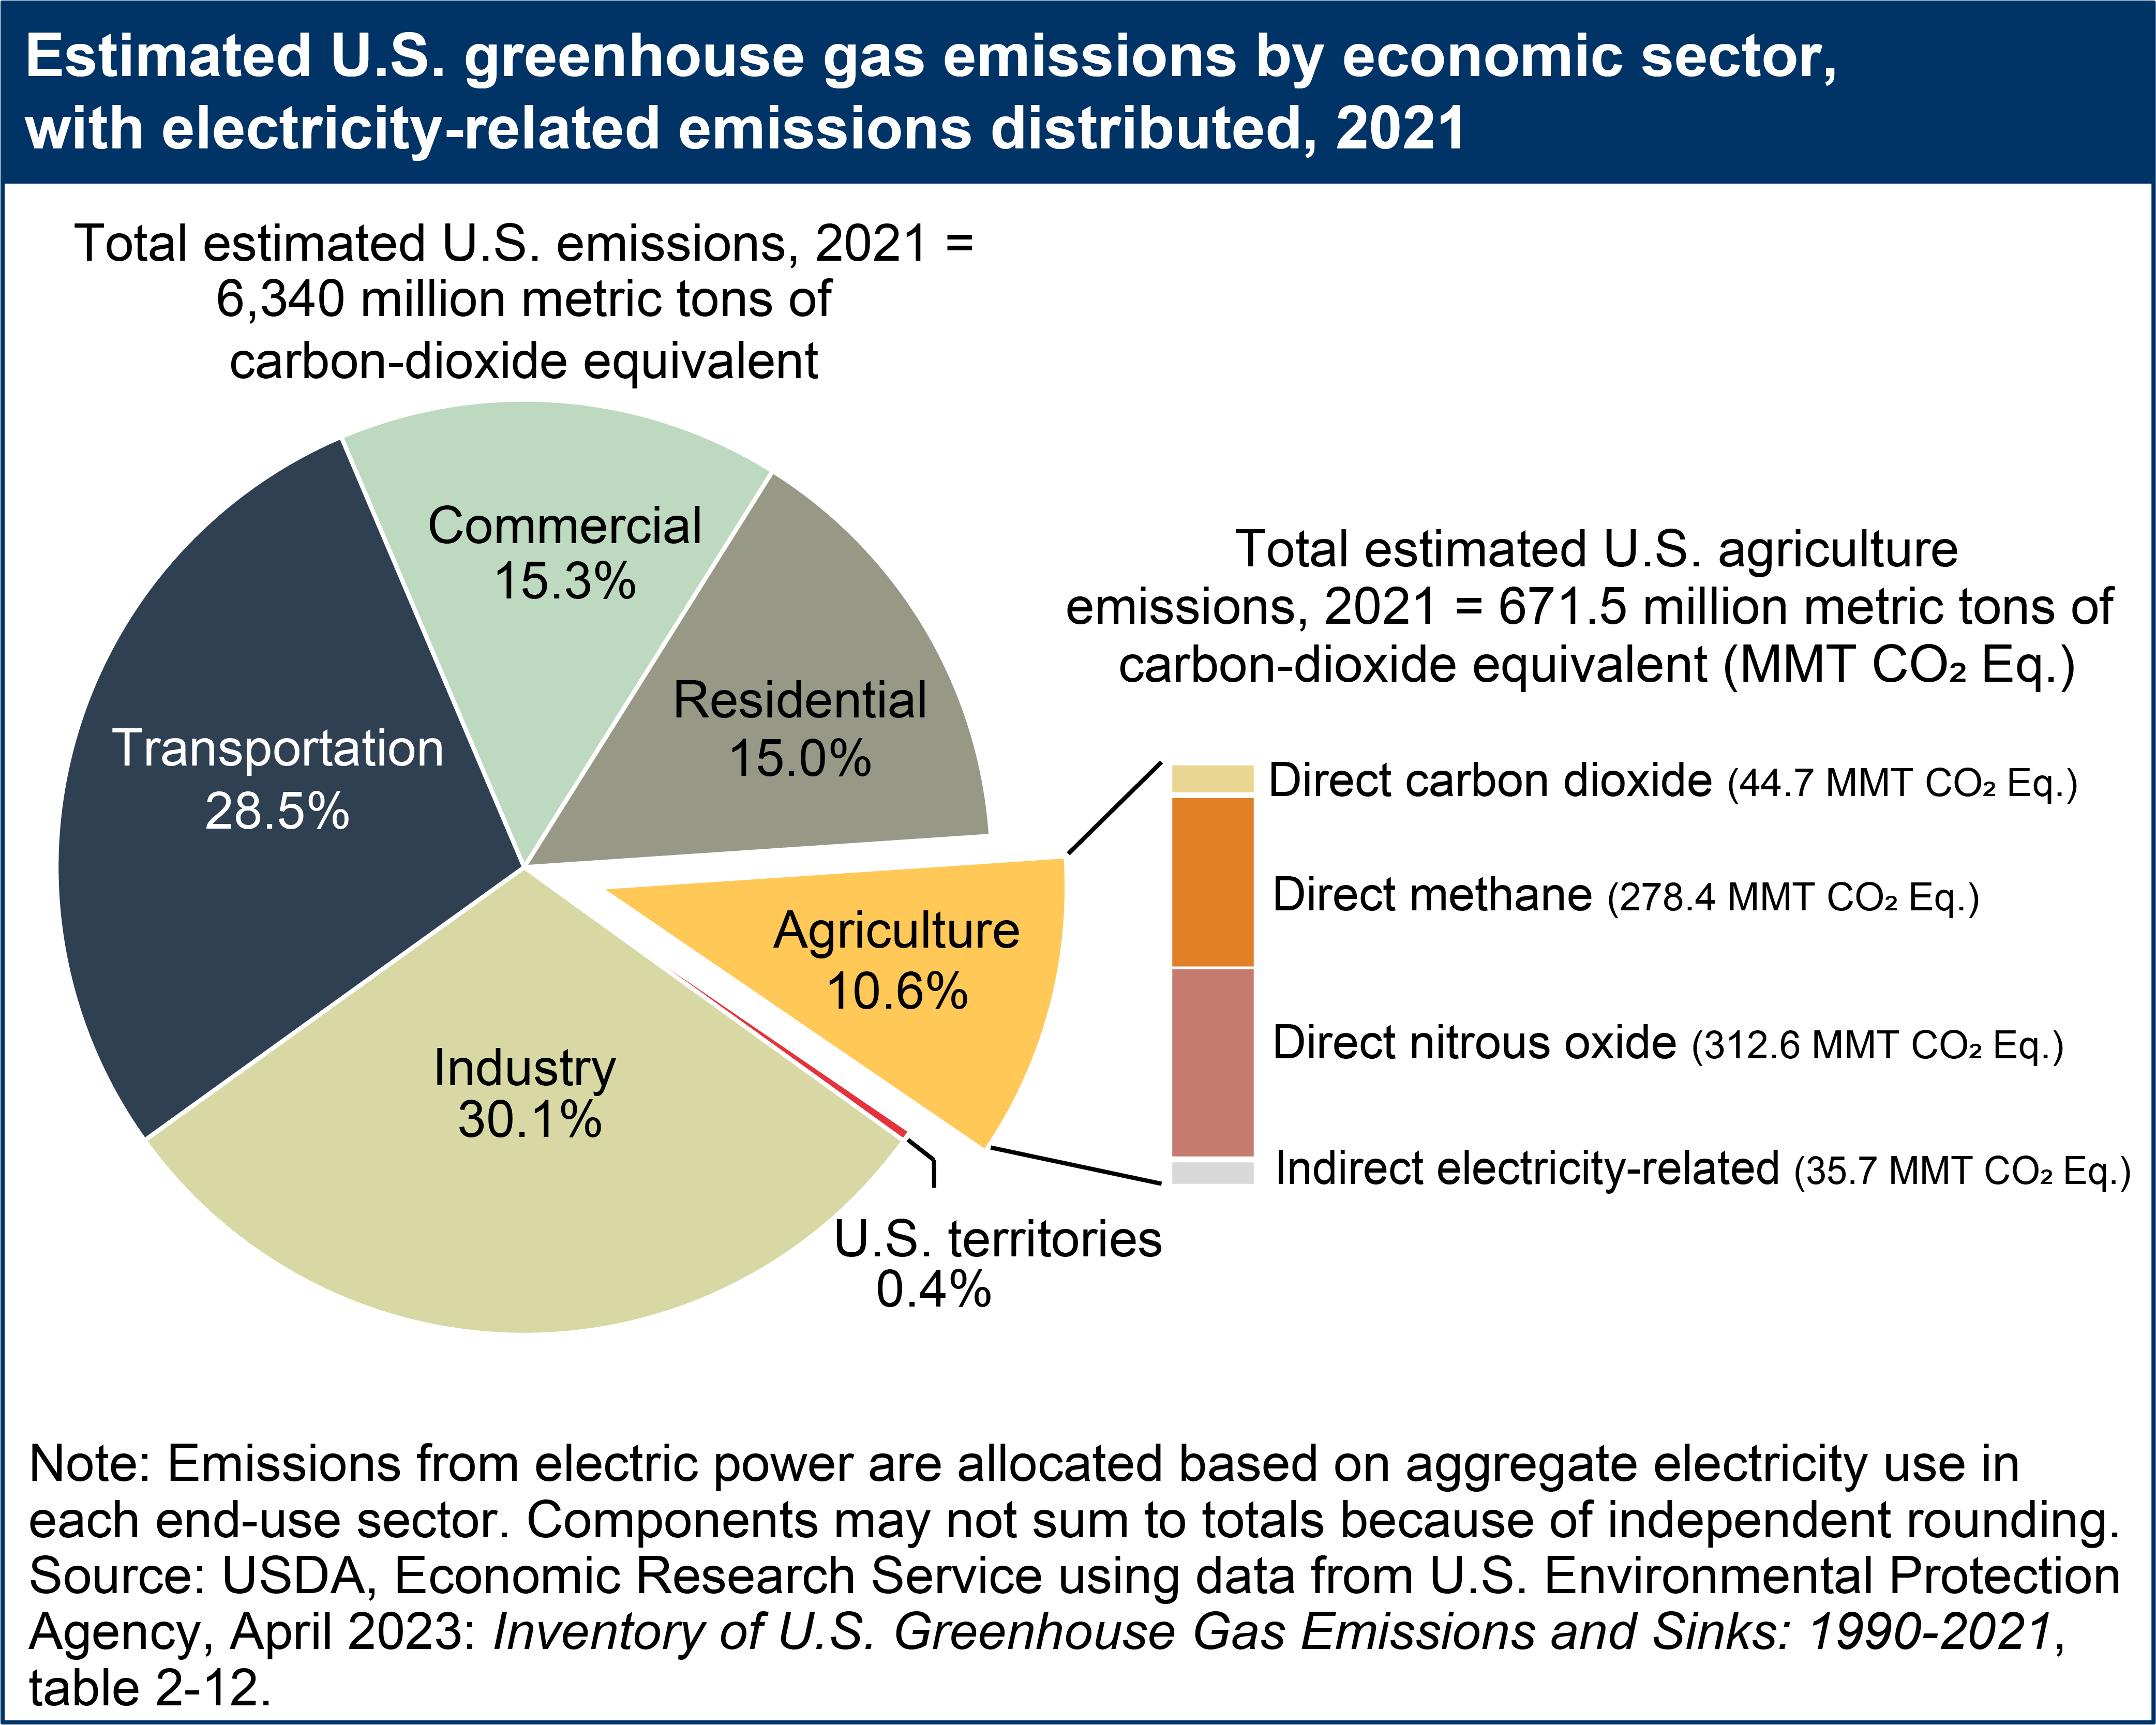 Can we reduce emissions without hurting jobs or companies